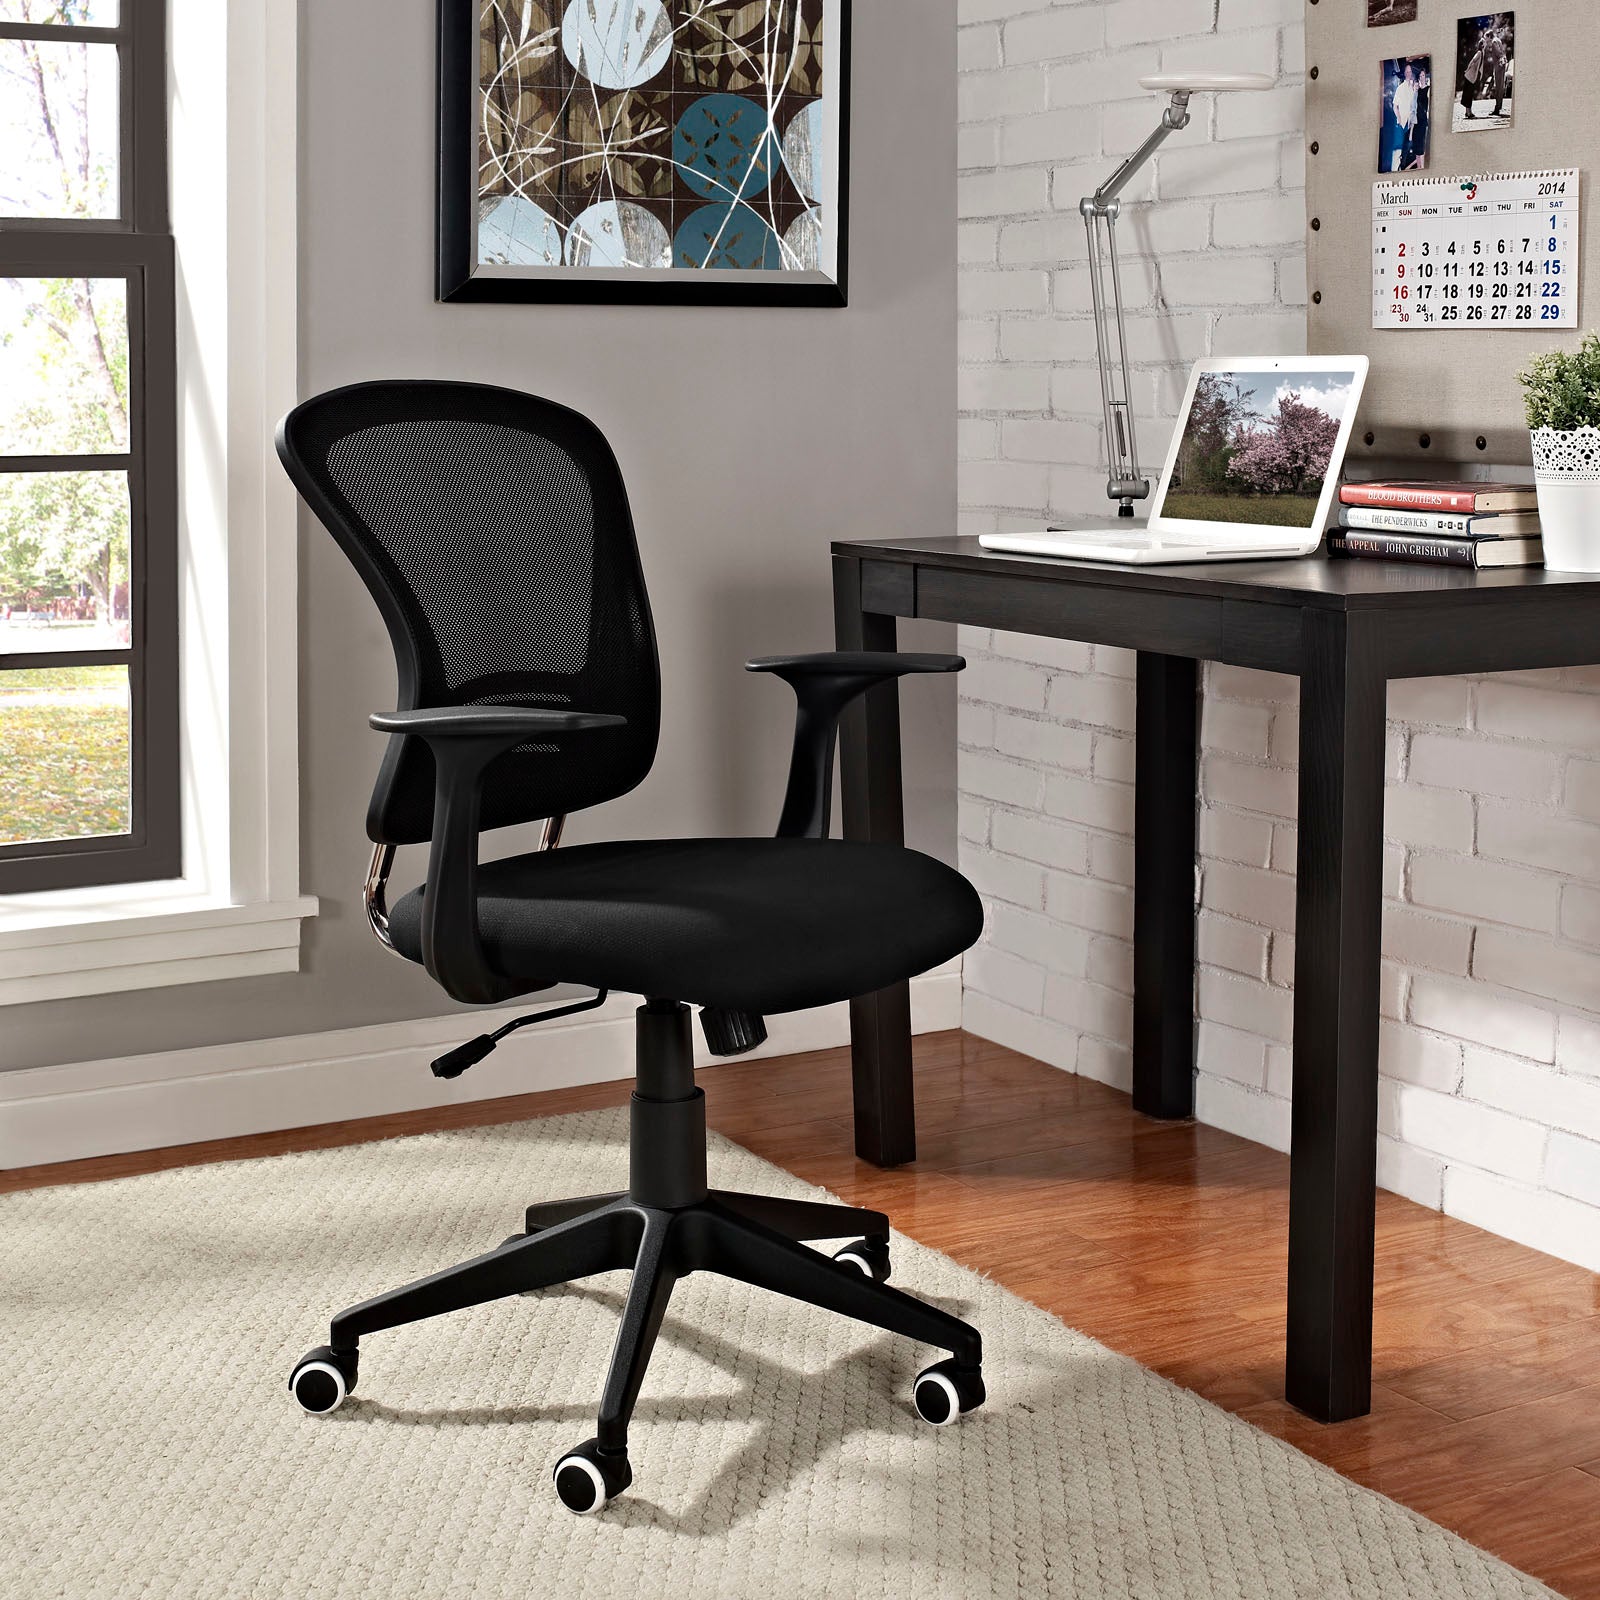 Increase Efficiency at workplace with Poise Office Chair